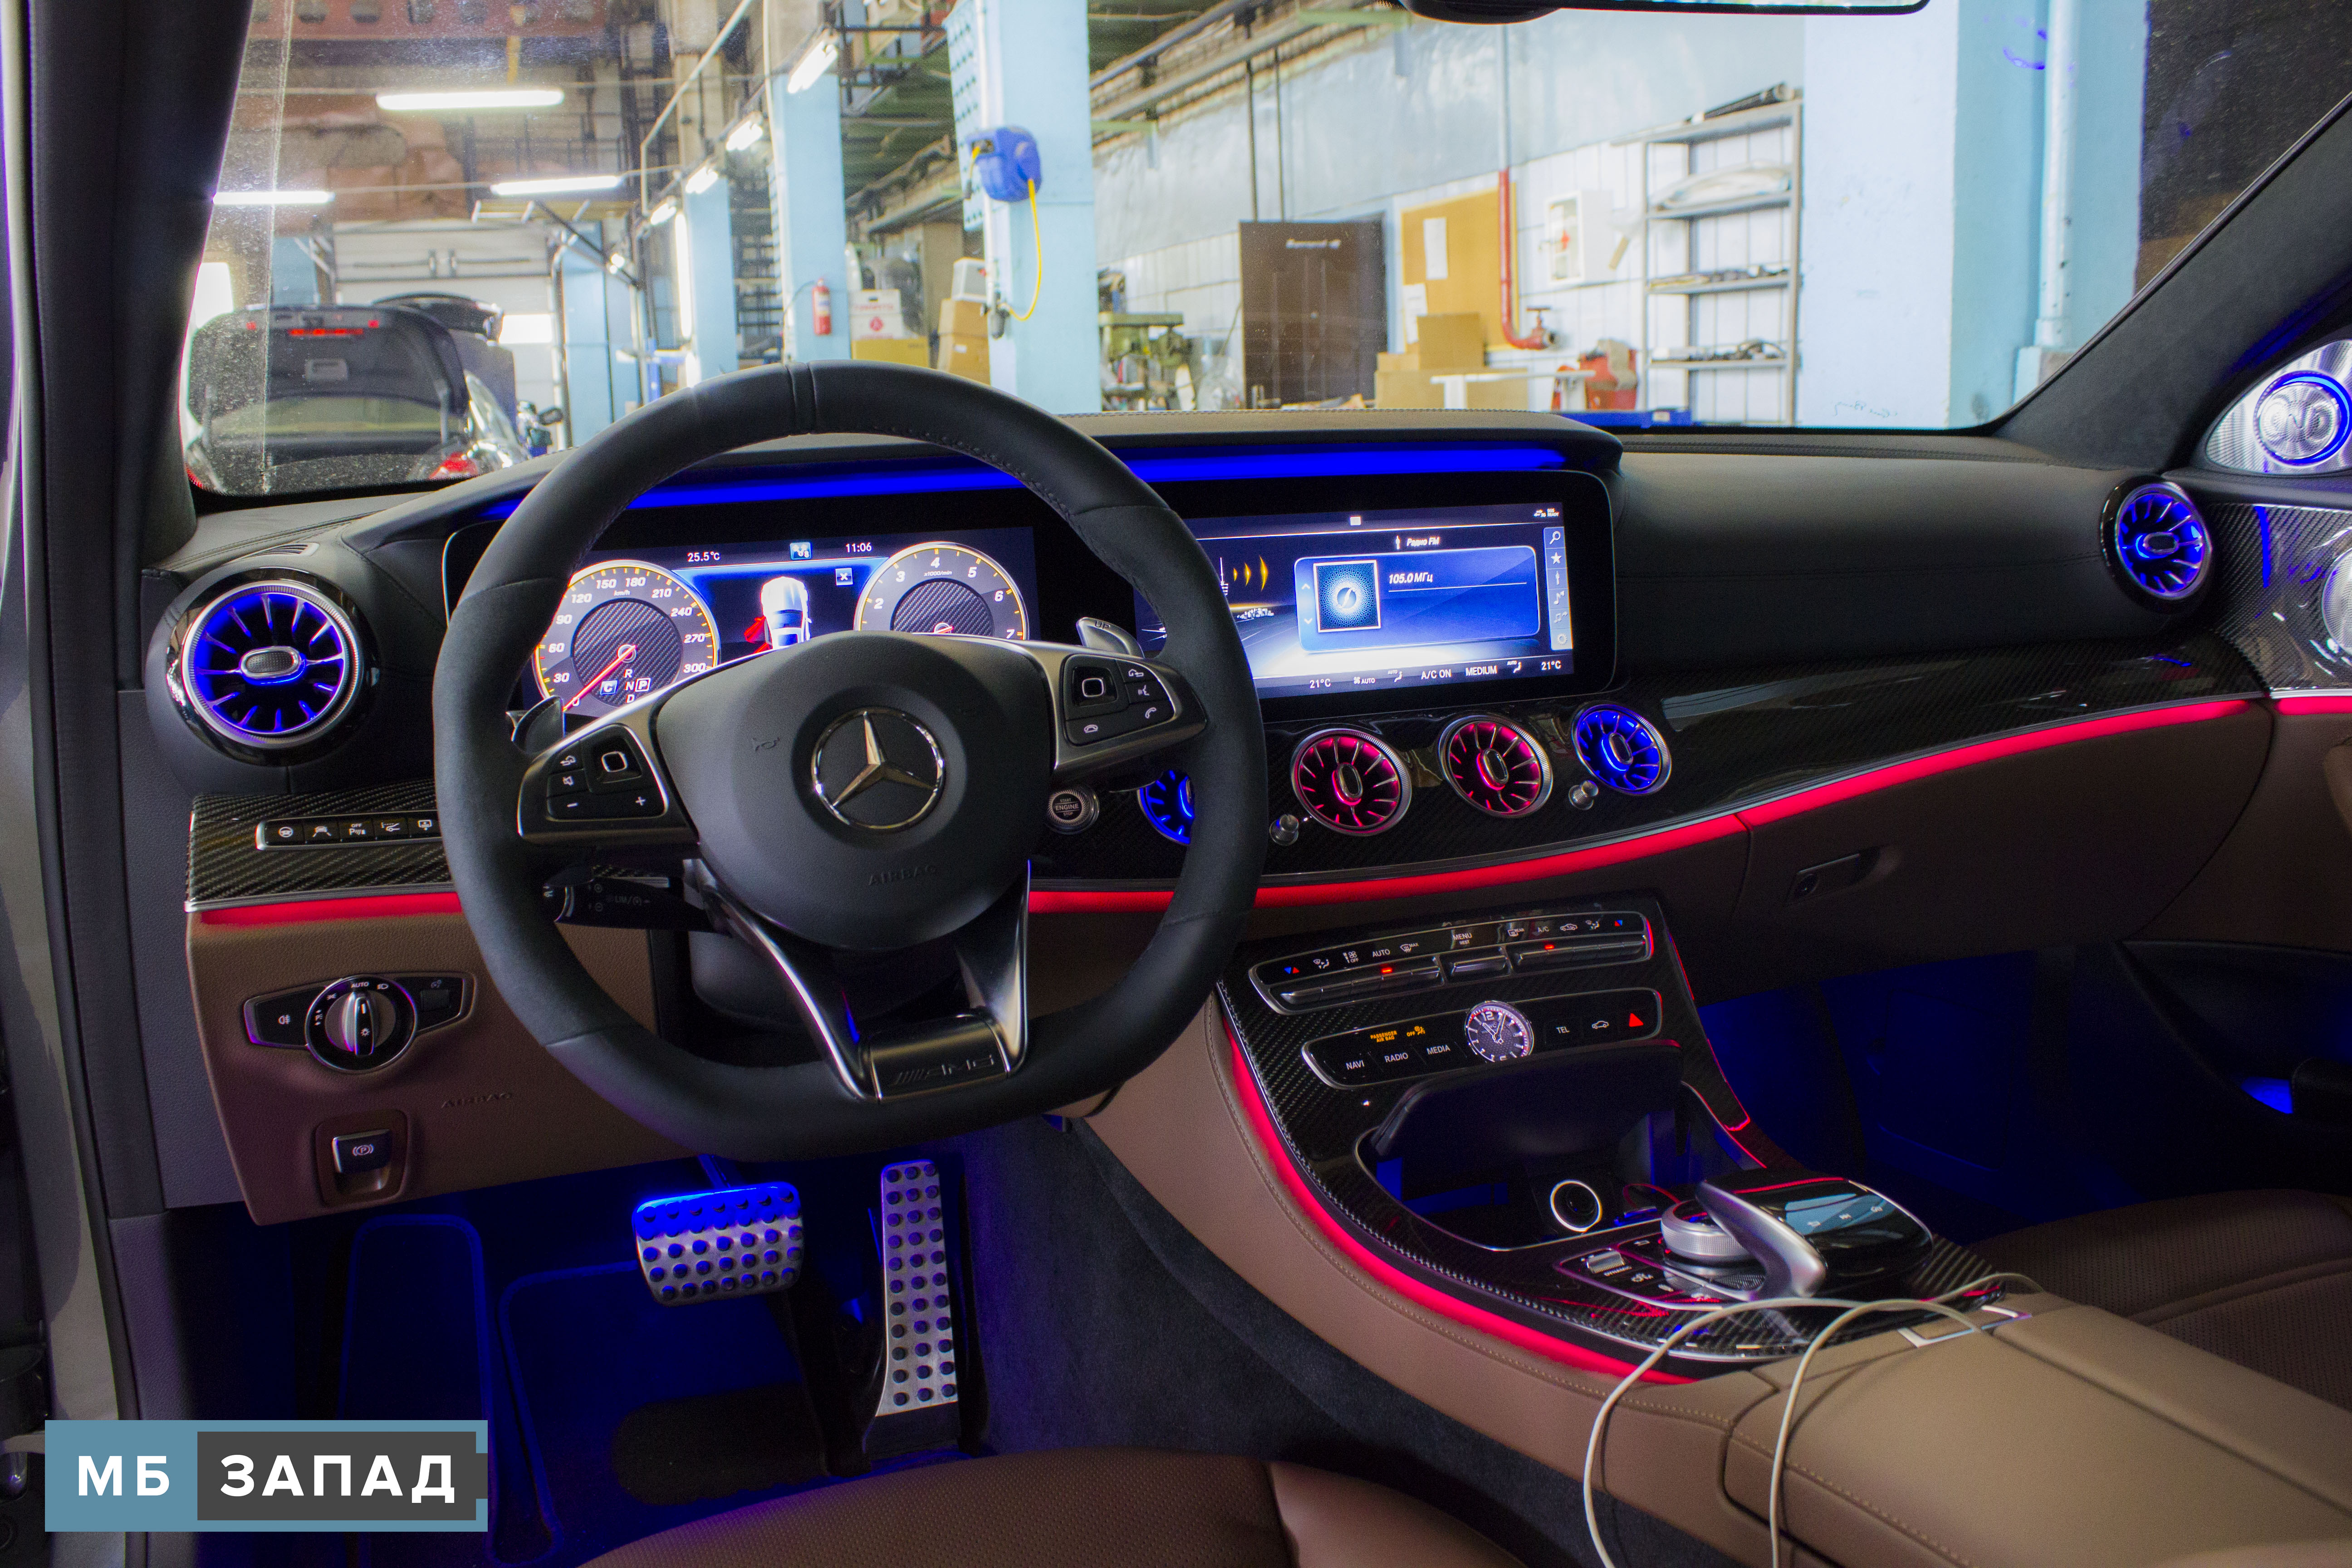 Mercedes CLS-Class (C257) interior restyling